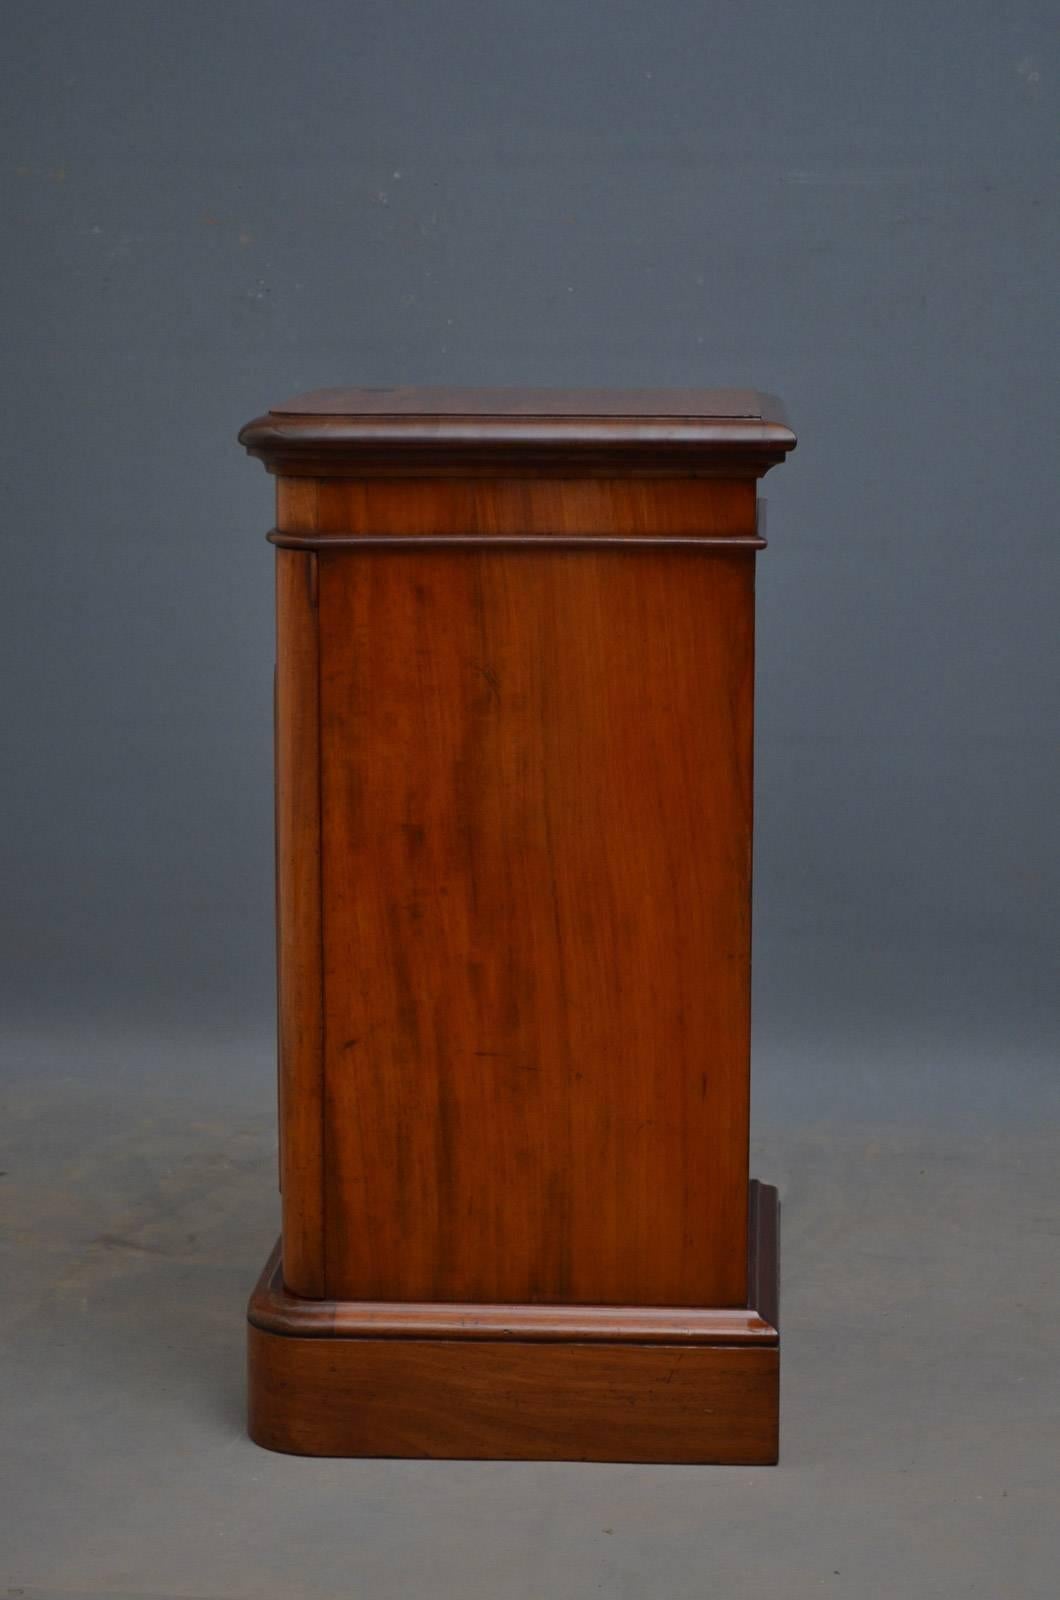 Late 19th Century Victorian Bedside Cabinet or Pedestal